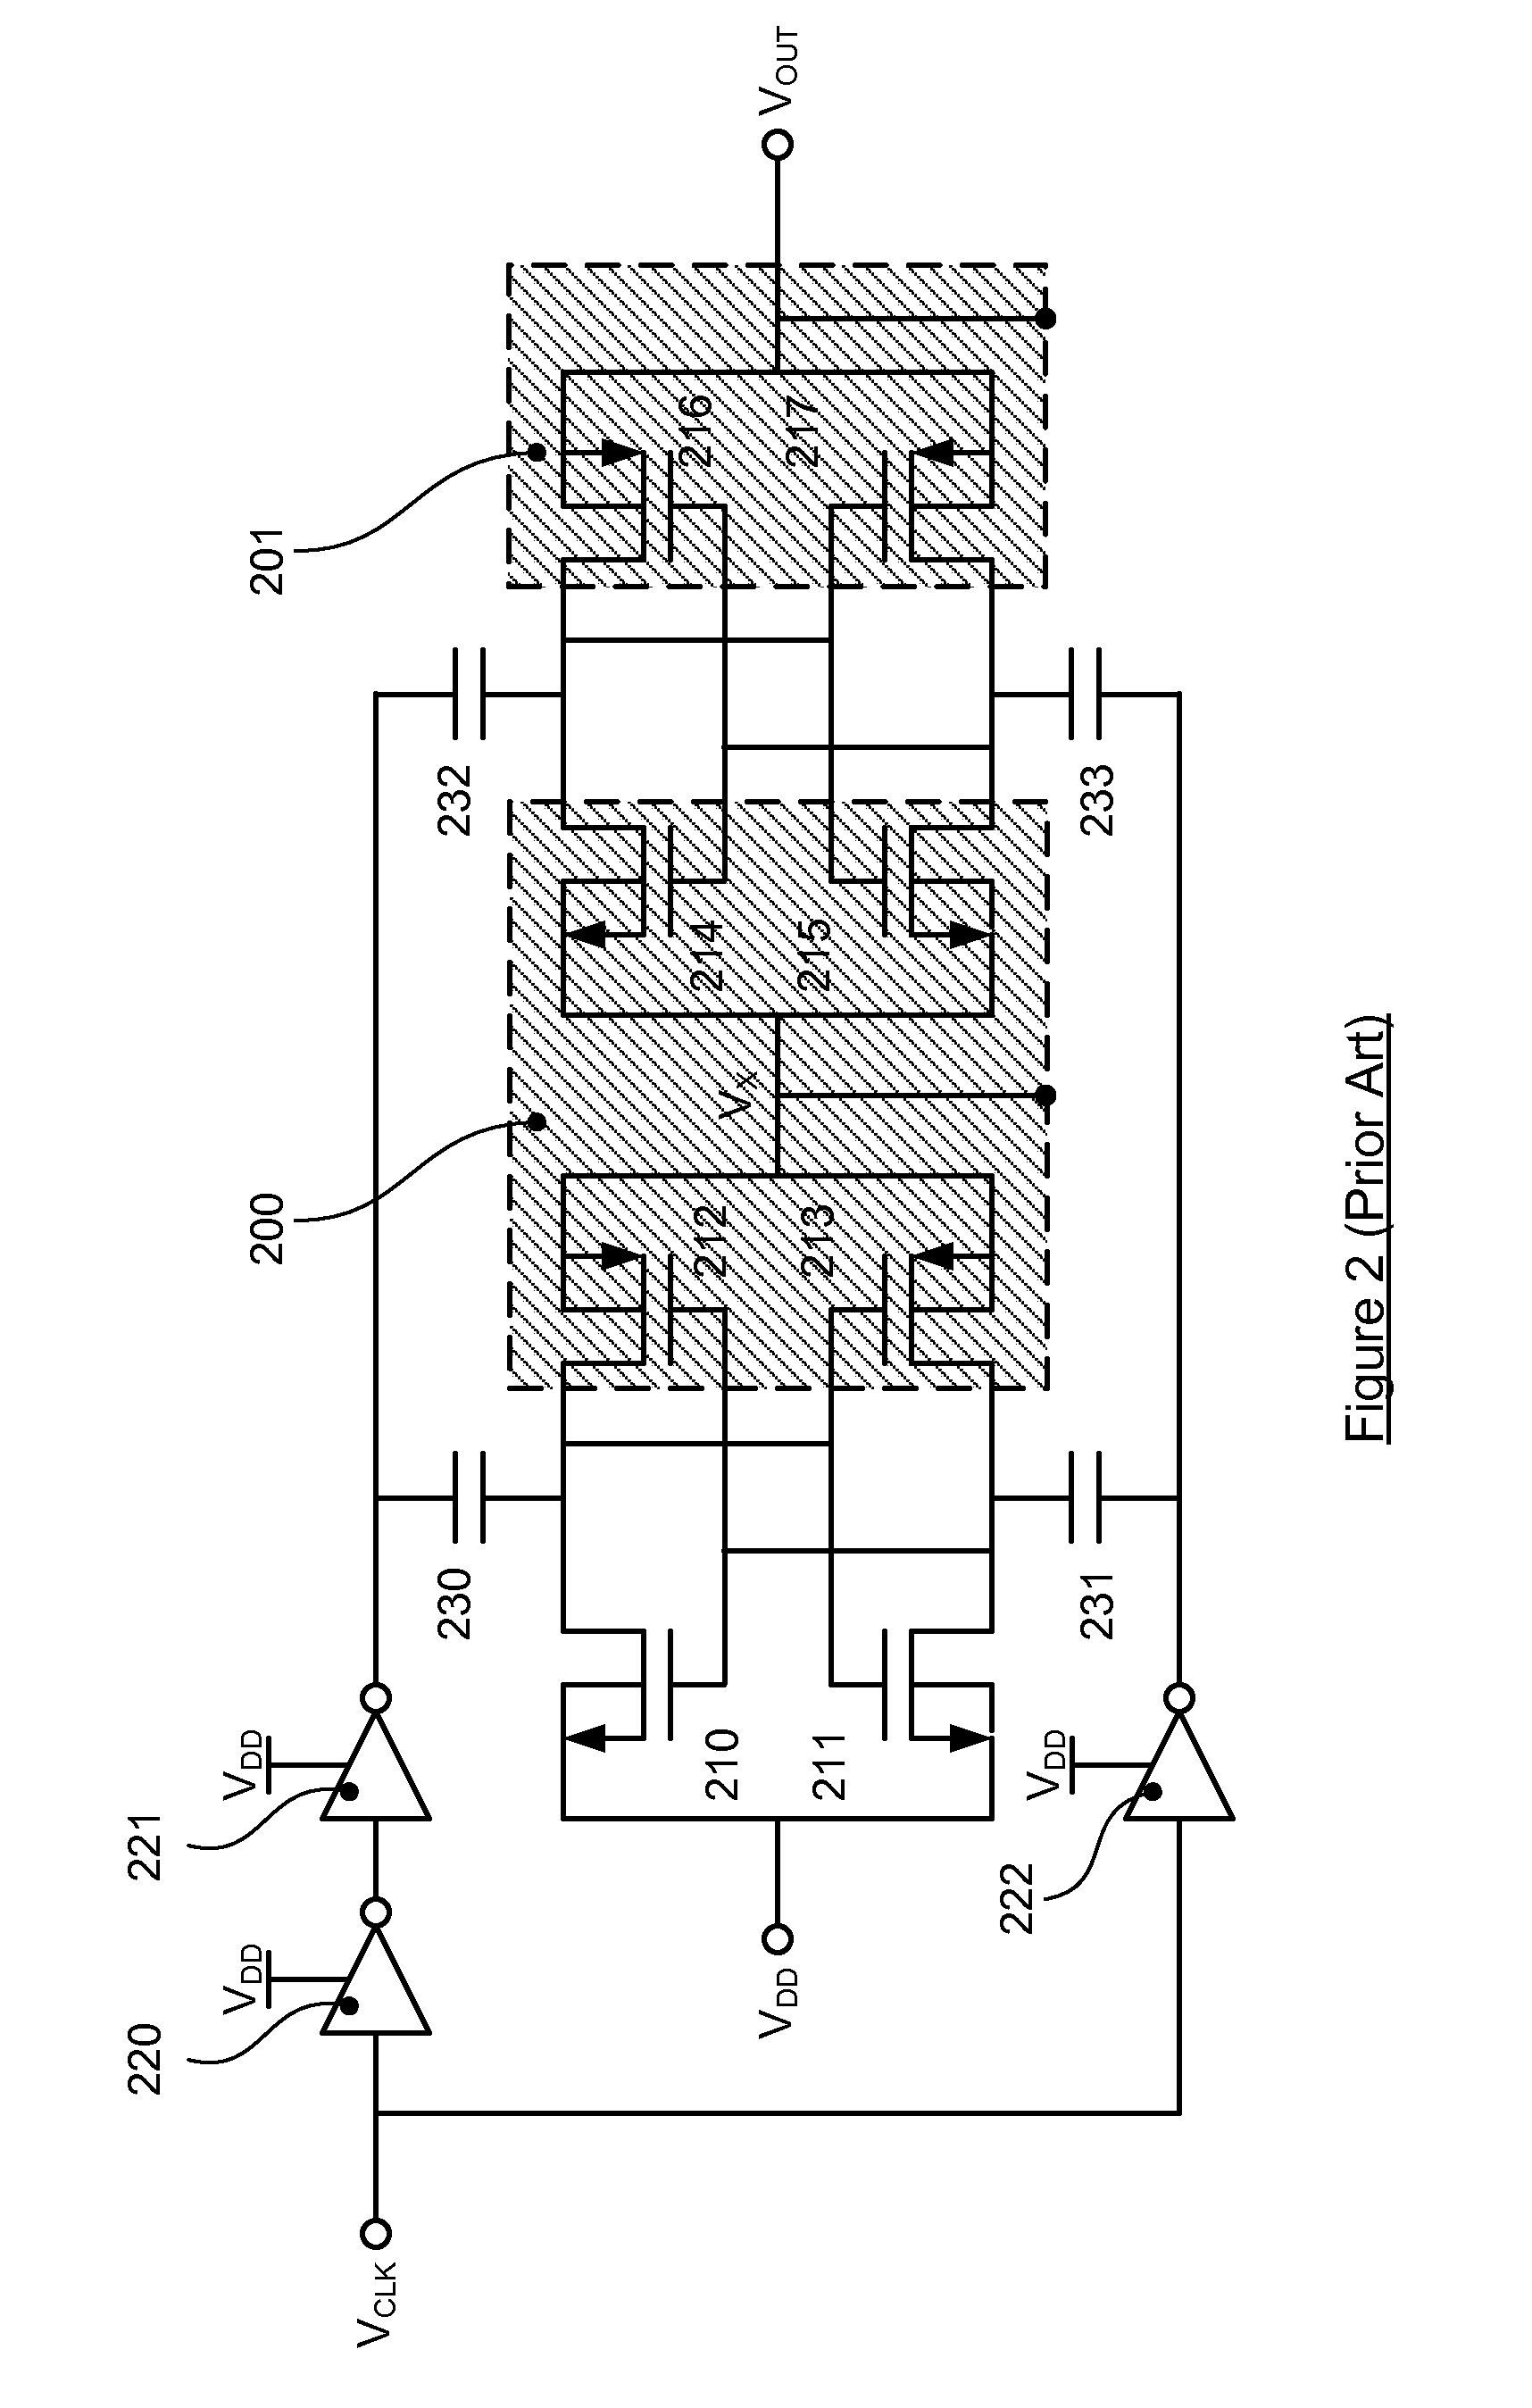 High-voltage MEMS apparatus and method